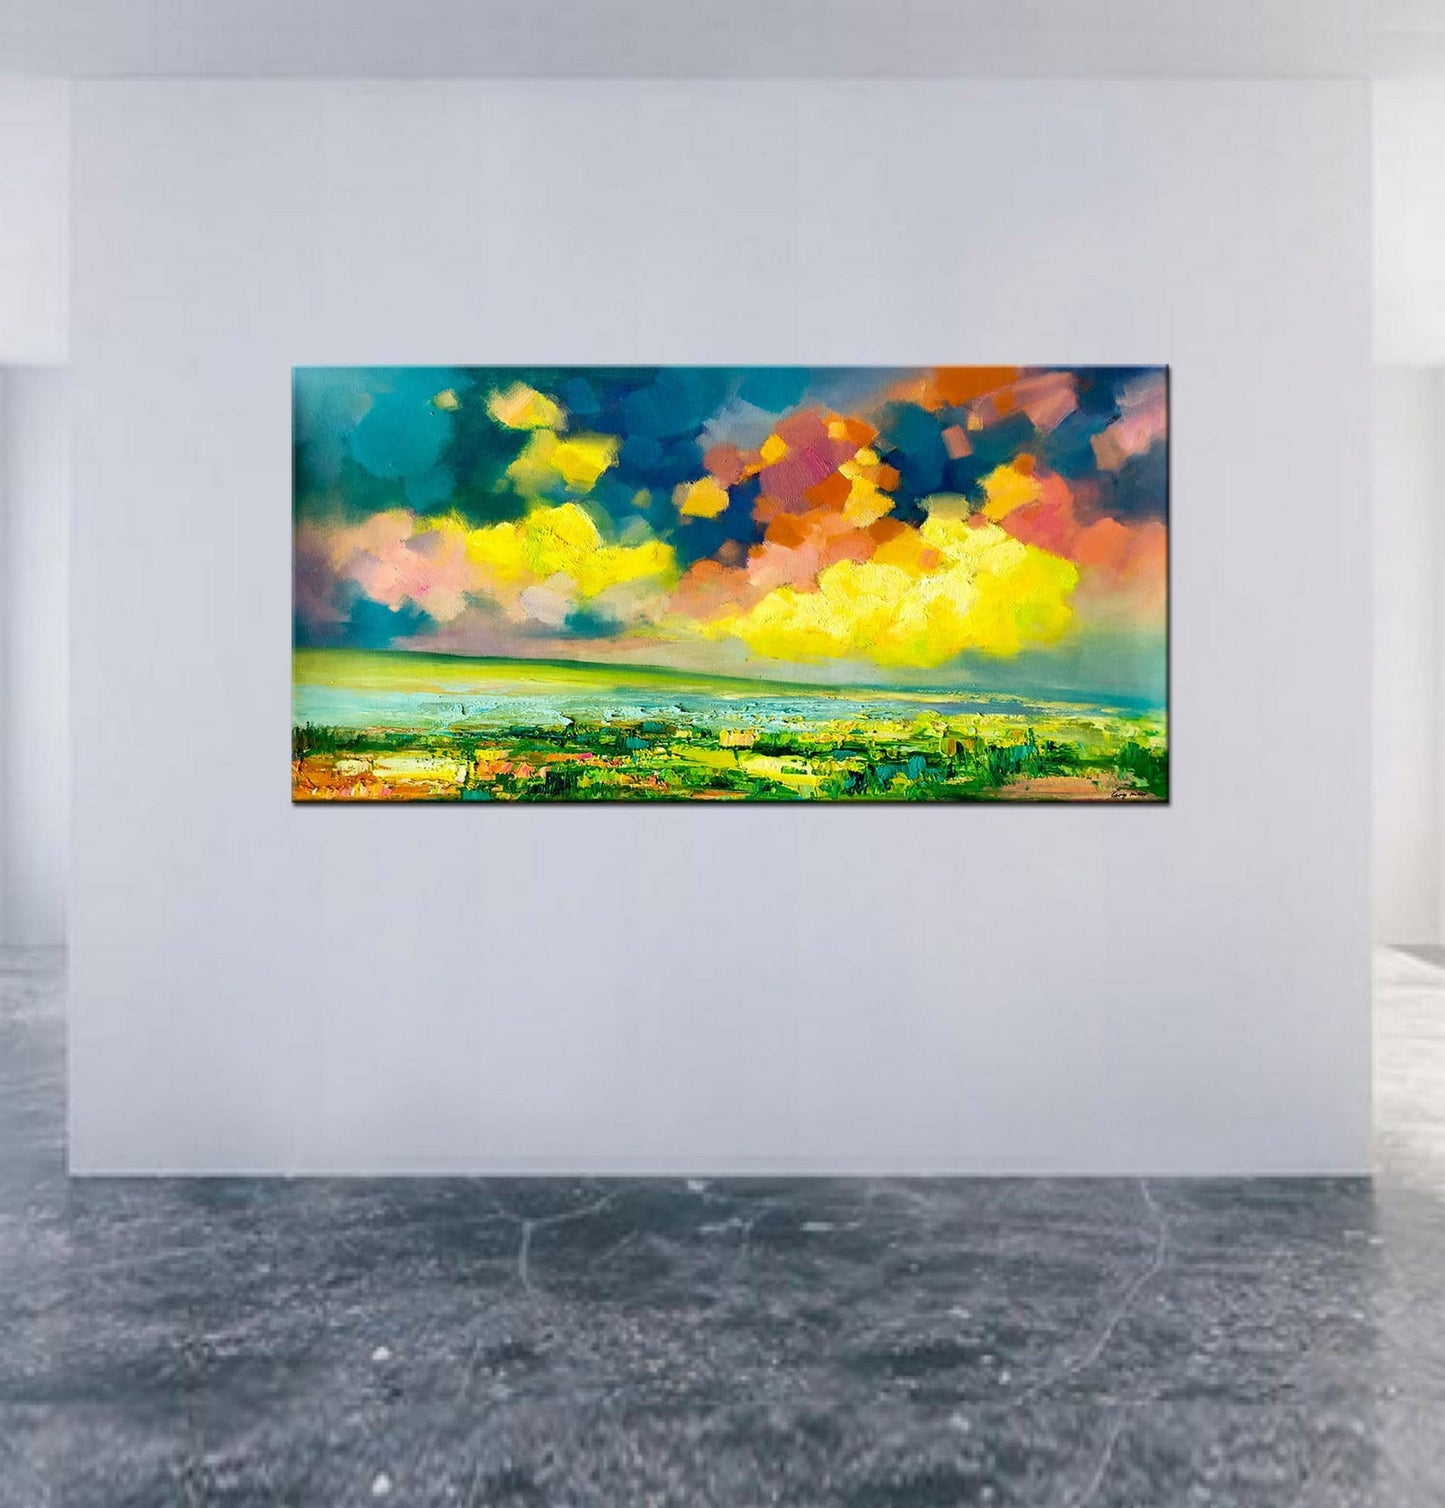 Oil Painting Spring Abstract Landscape, Wall Art, Oil On Canvas Painting, Abstract Landscape, Large Oil Painting Original Canvas